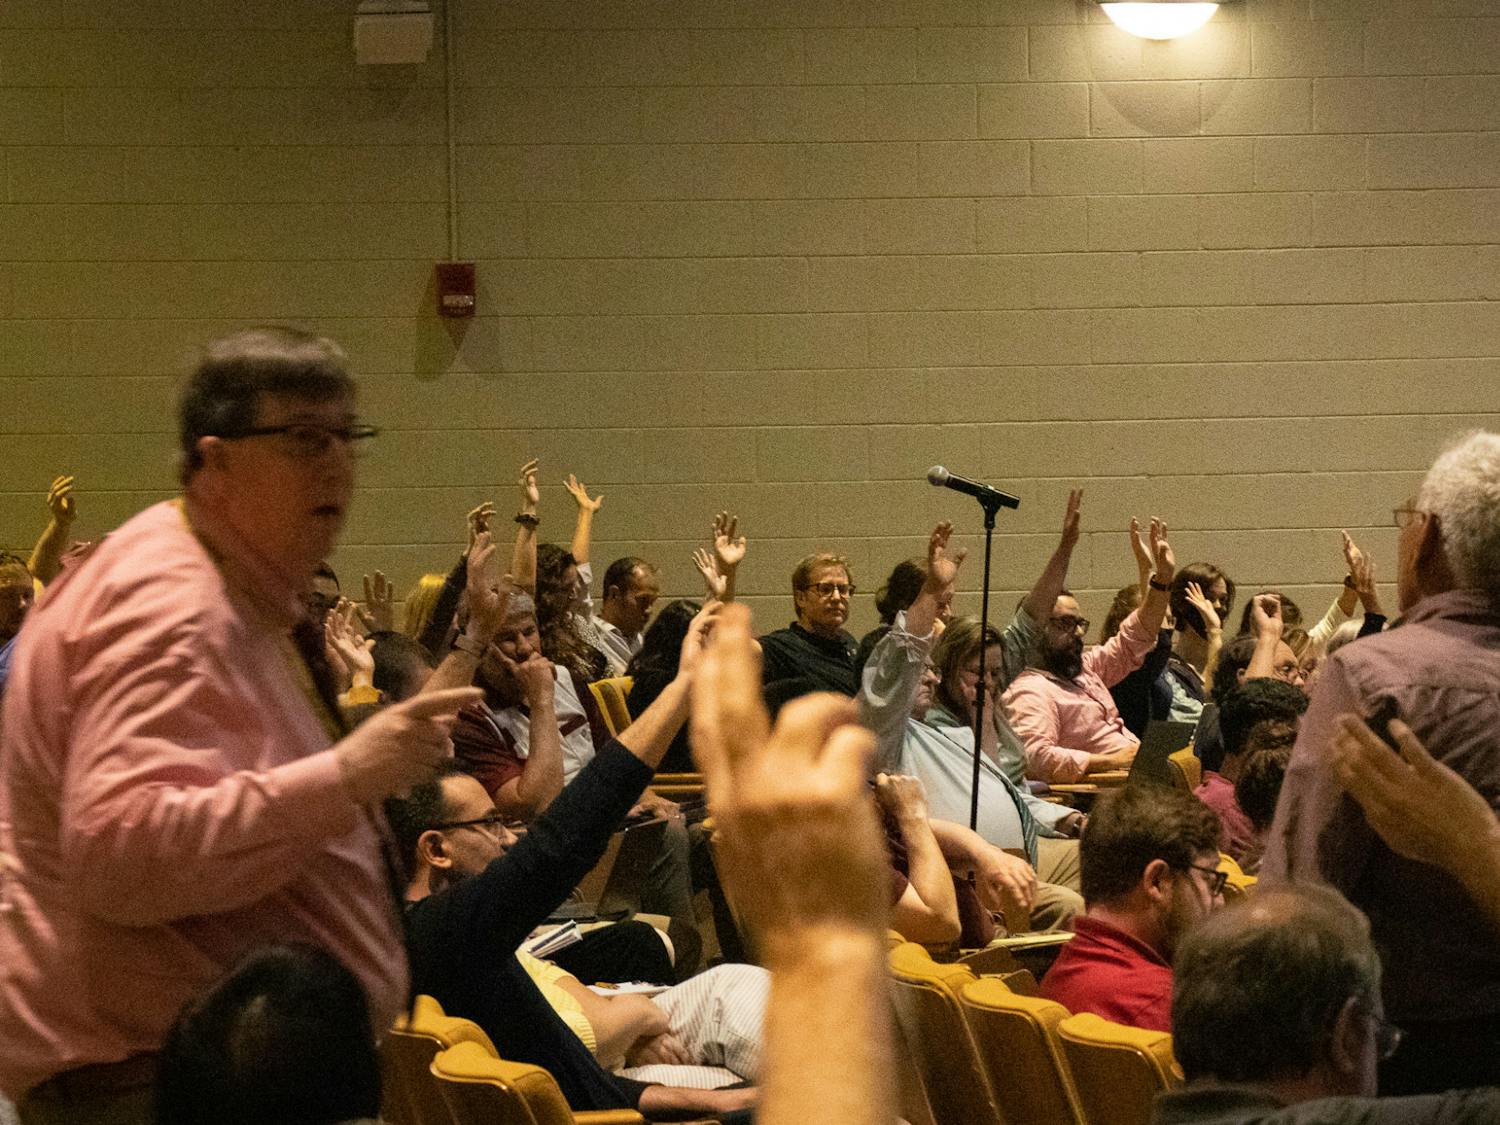 Nursing Professor and Faculty Senator Abbas Tavakoli helps Parliamentarian Bill Sudduth tally votes in favor of an amendment during a faculty senate on April 19, 2023, in the Booker T. Washington Auditorium. The amendment failed by a vote of 33 for and 41 against. &nbsp;